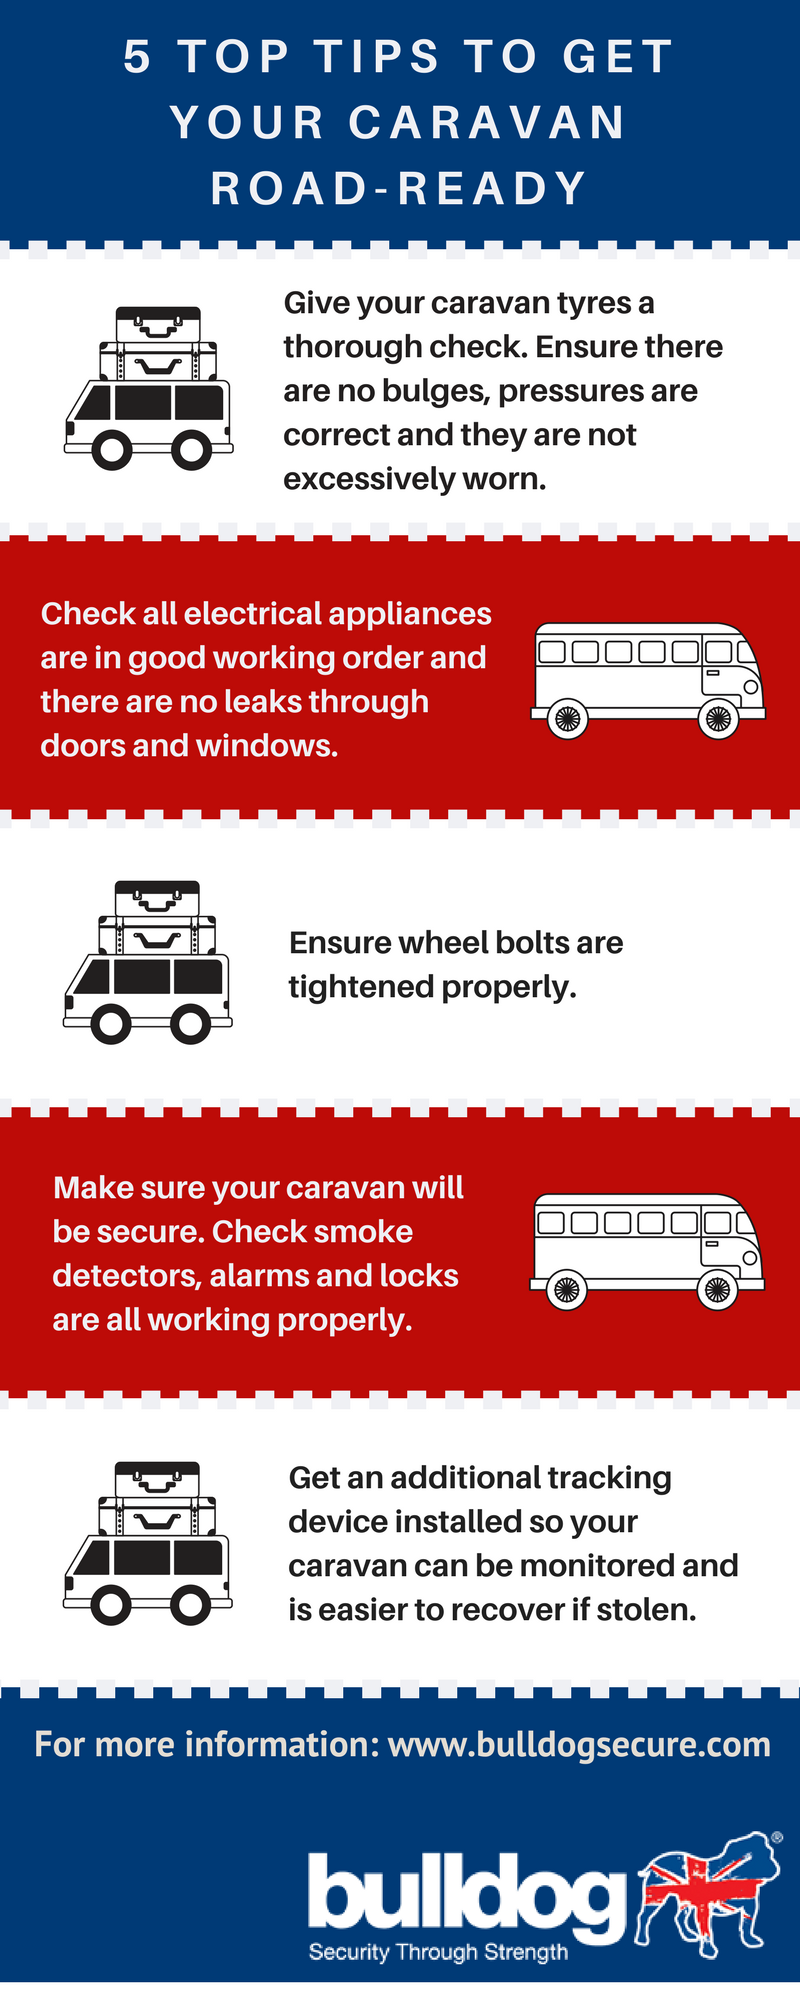 Infographic bulldog Apr 18 - 5 top tips to caravan road ready.png